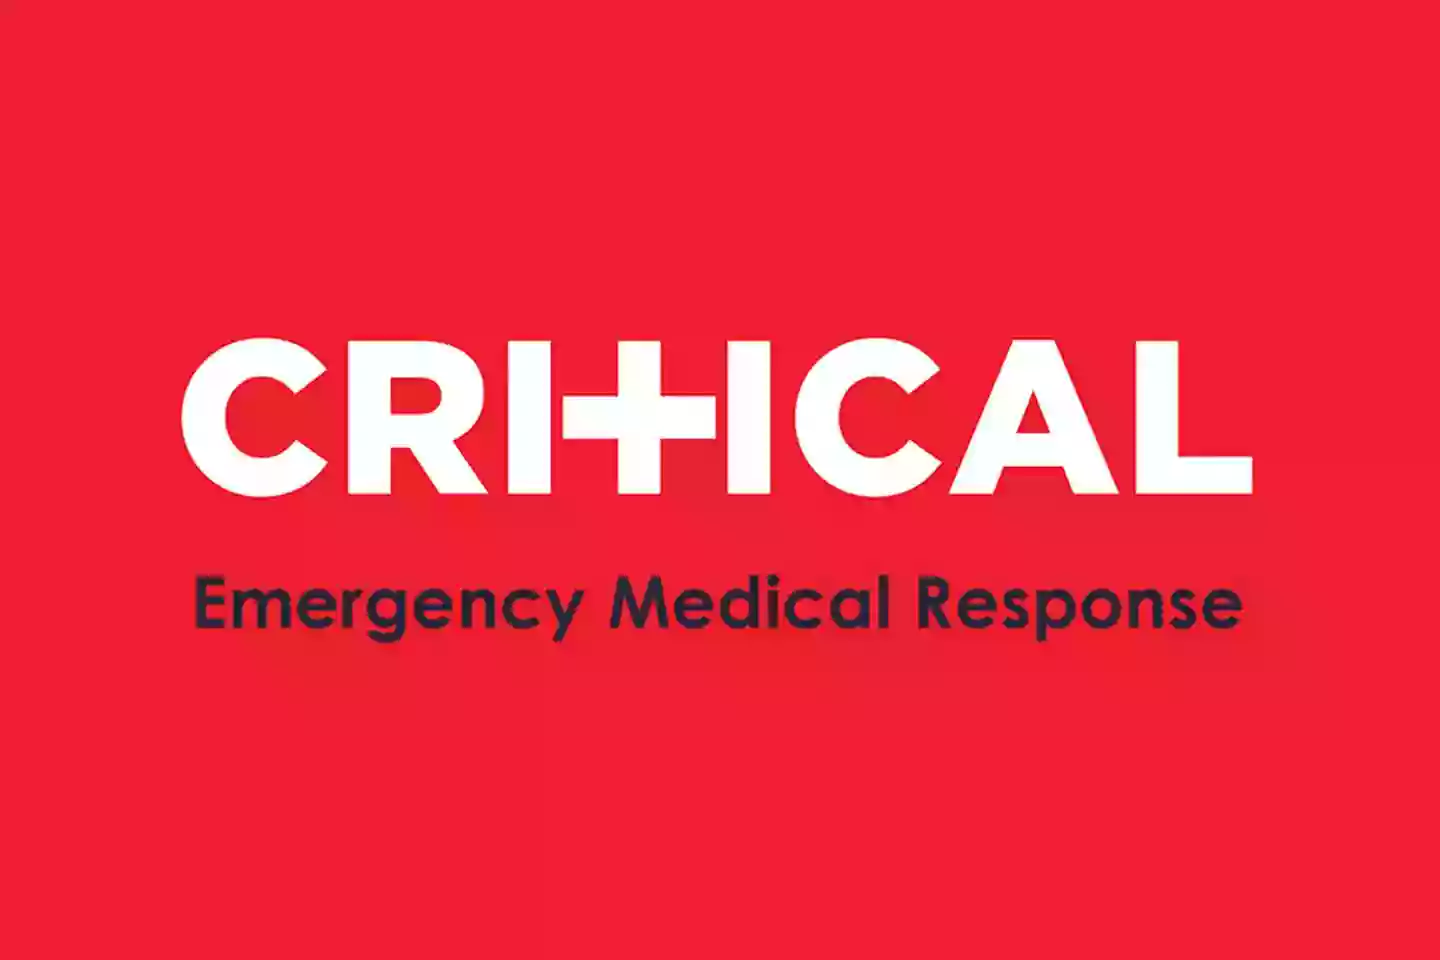 CRITICAL - The Emergency Medical Response Charity